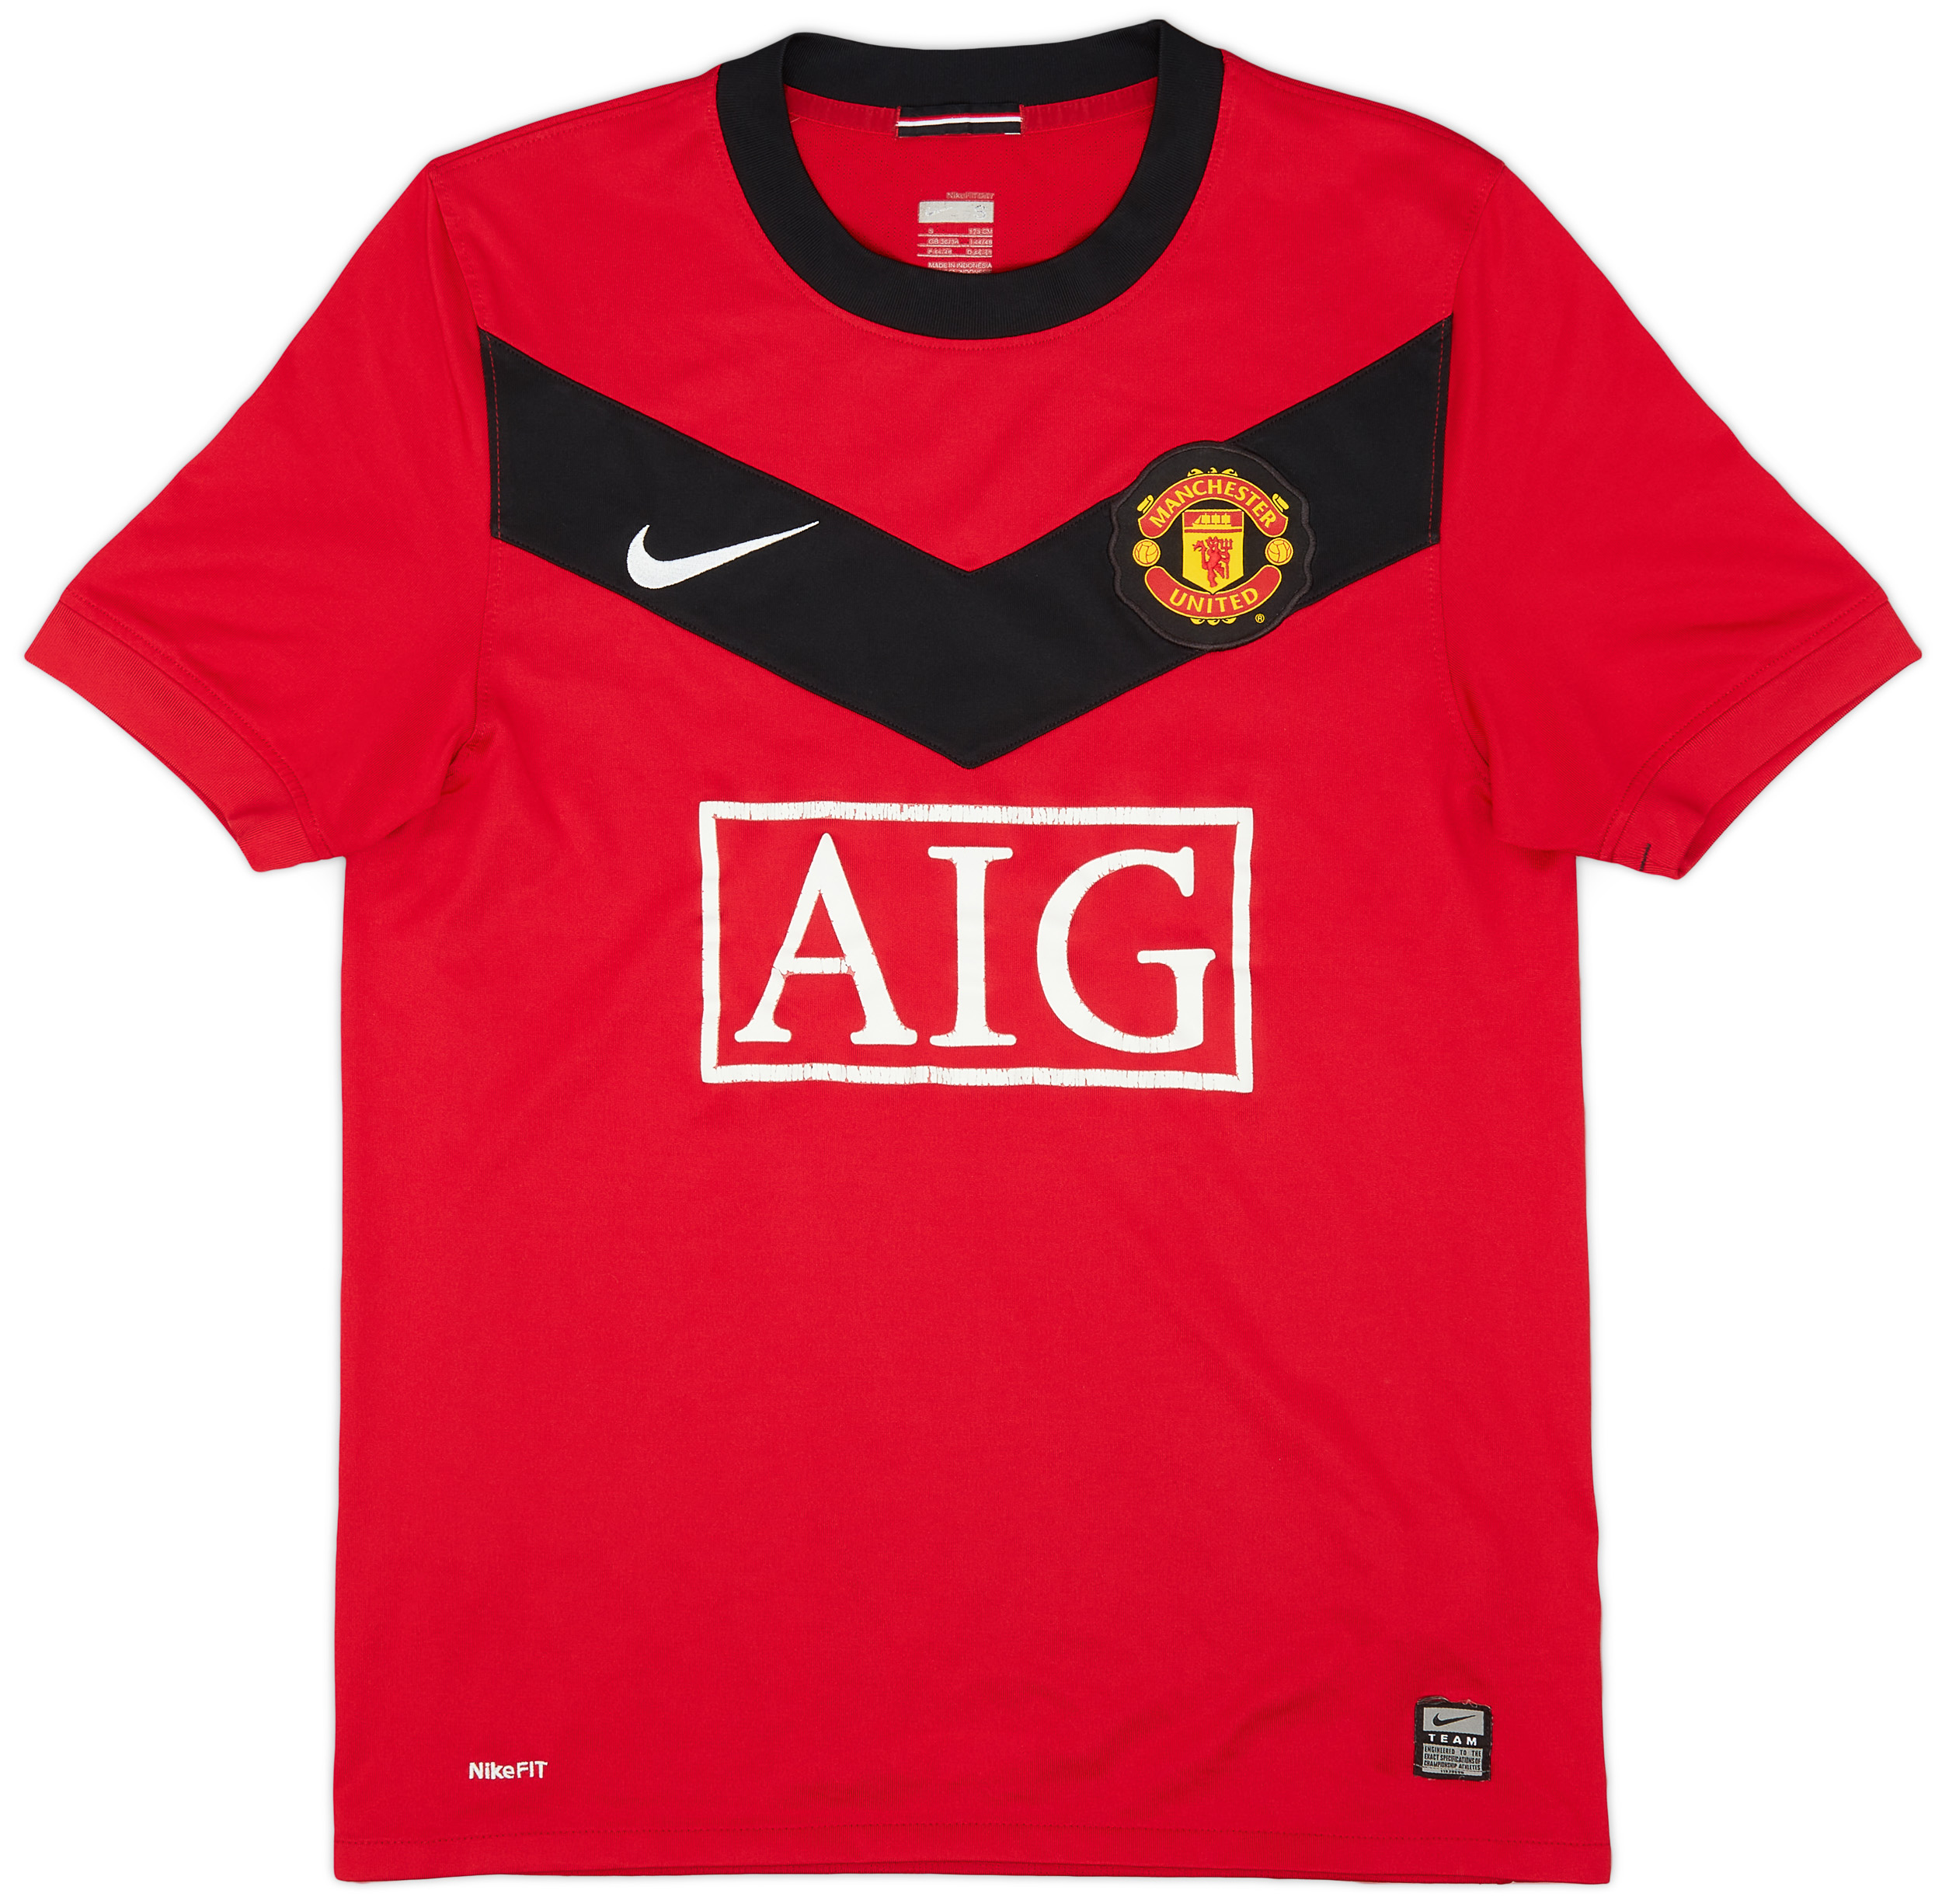 2009-10 Manchester United Home Shirt - 6/10 - ()